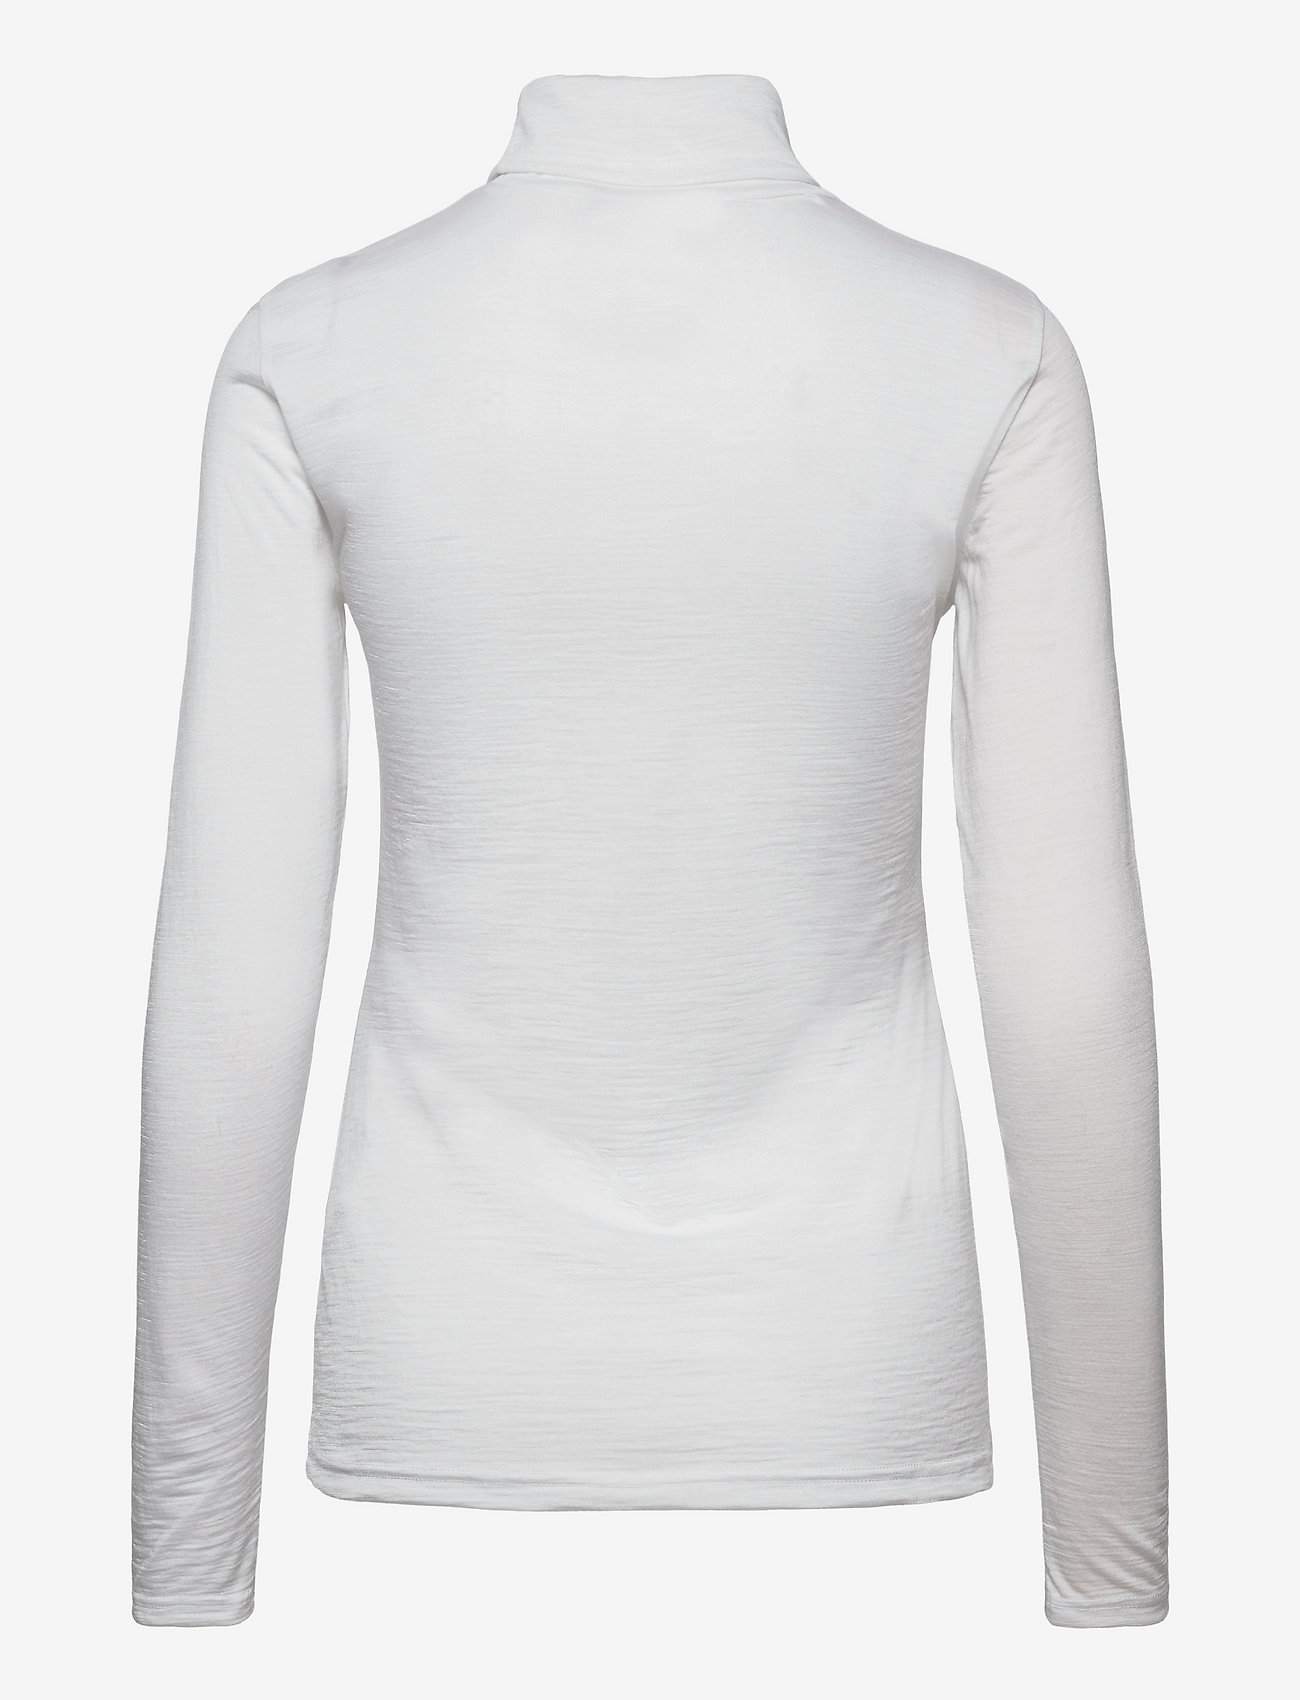 My Essential Wardrobe - 01 THE ROLLNECK - t-shirts & tops - off white - 1